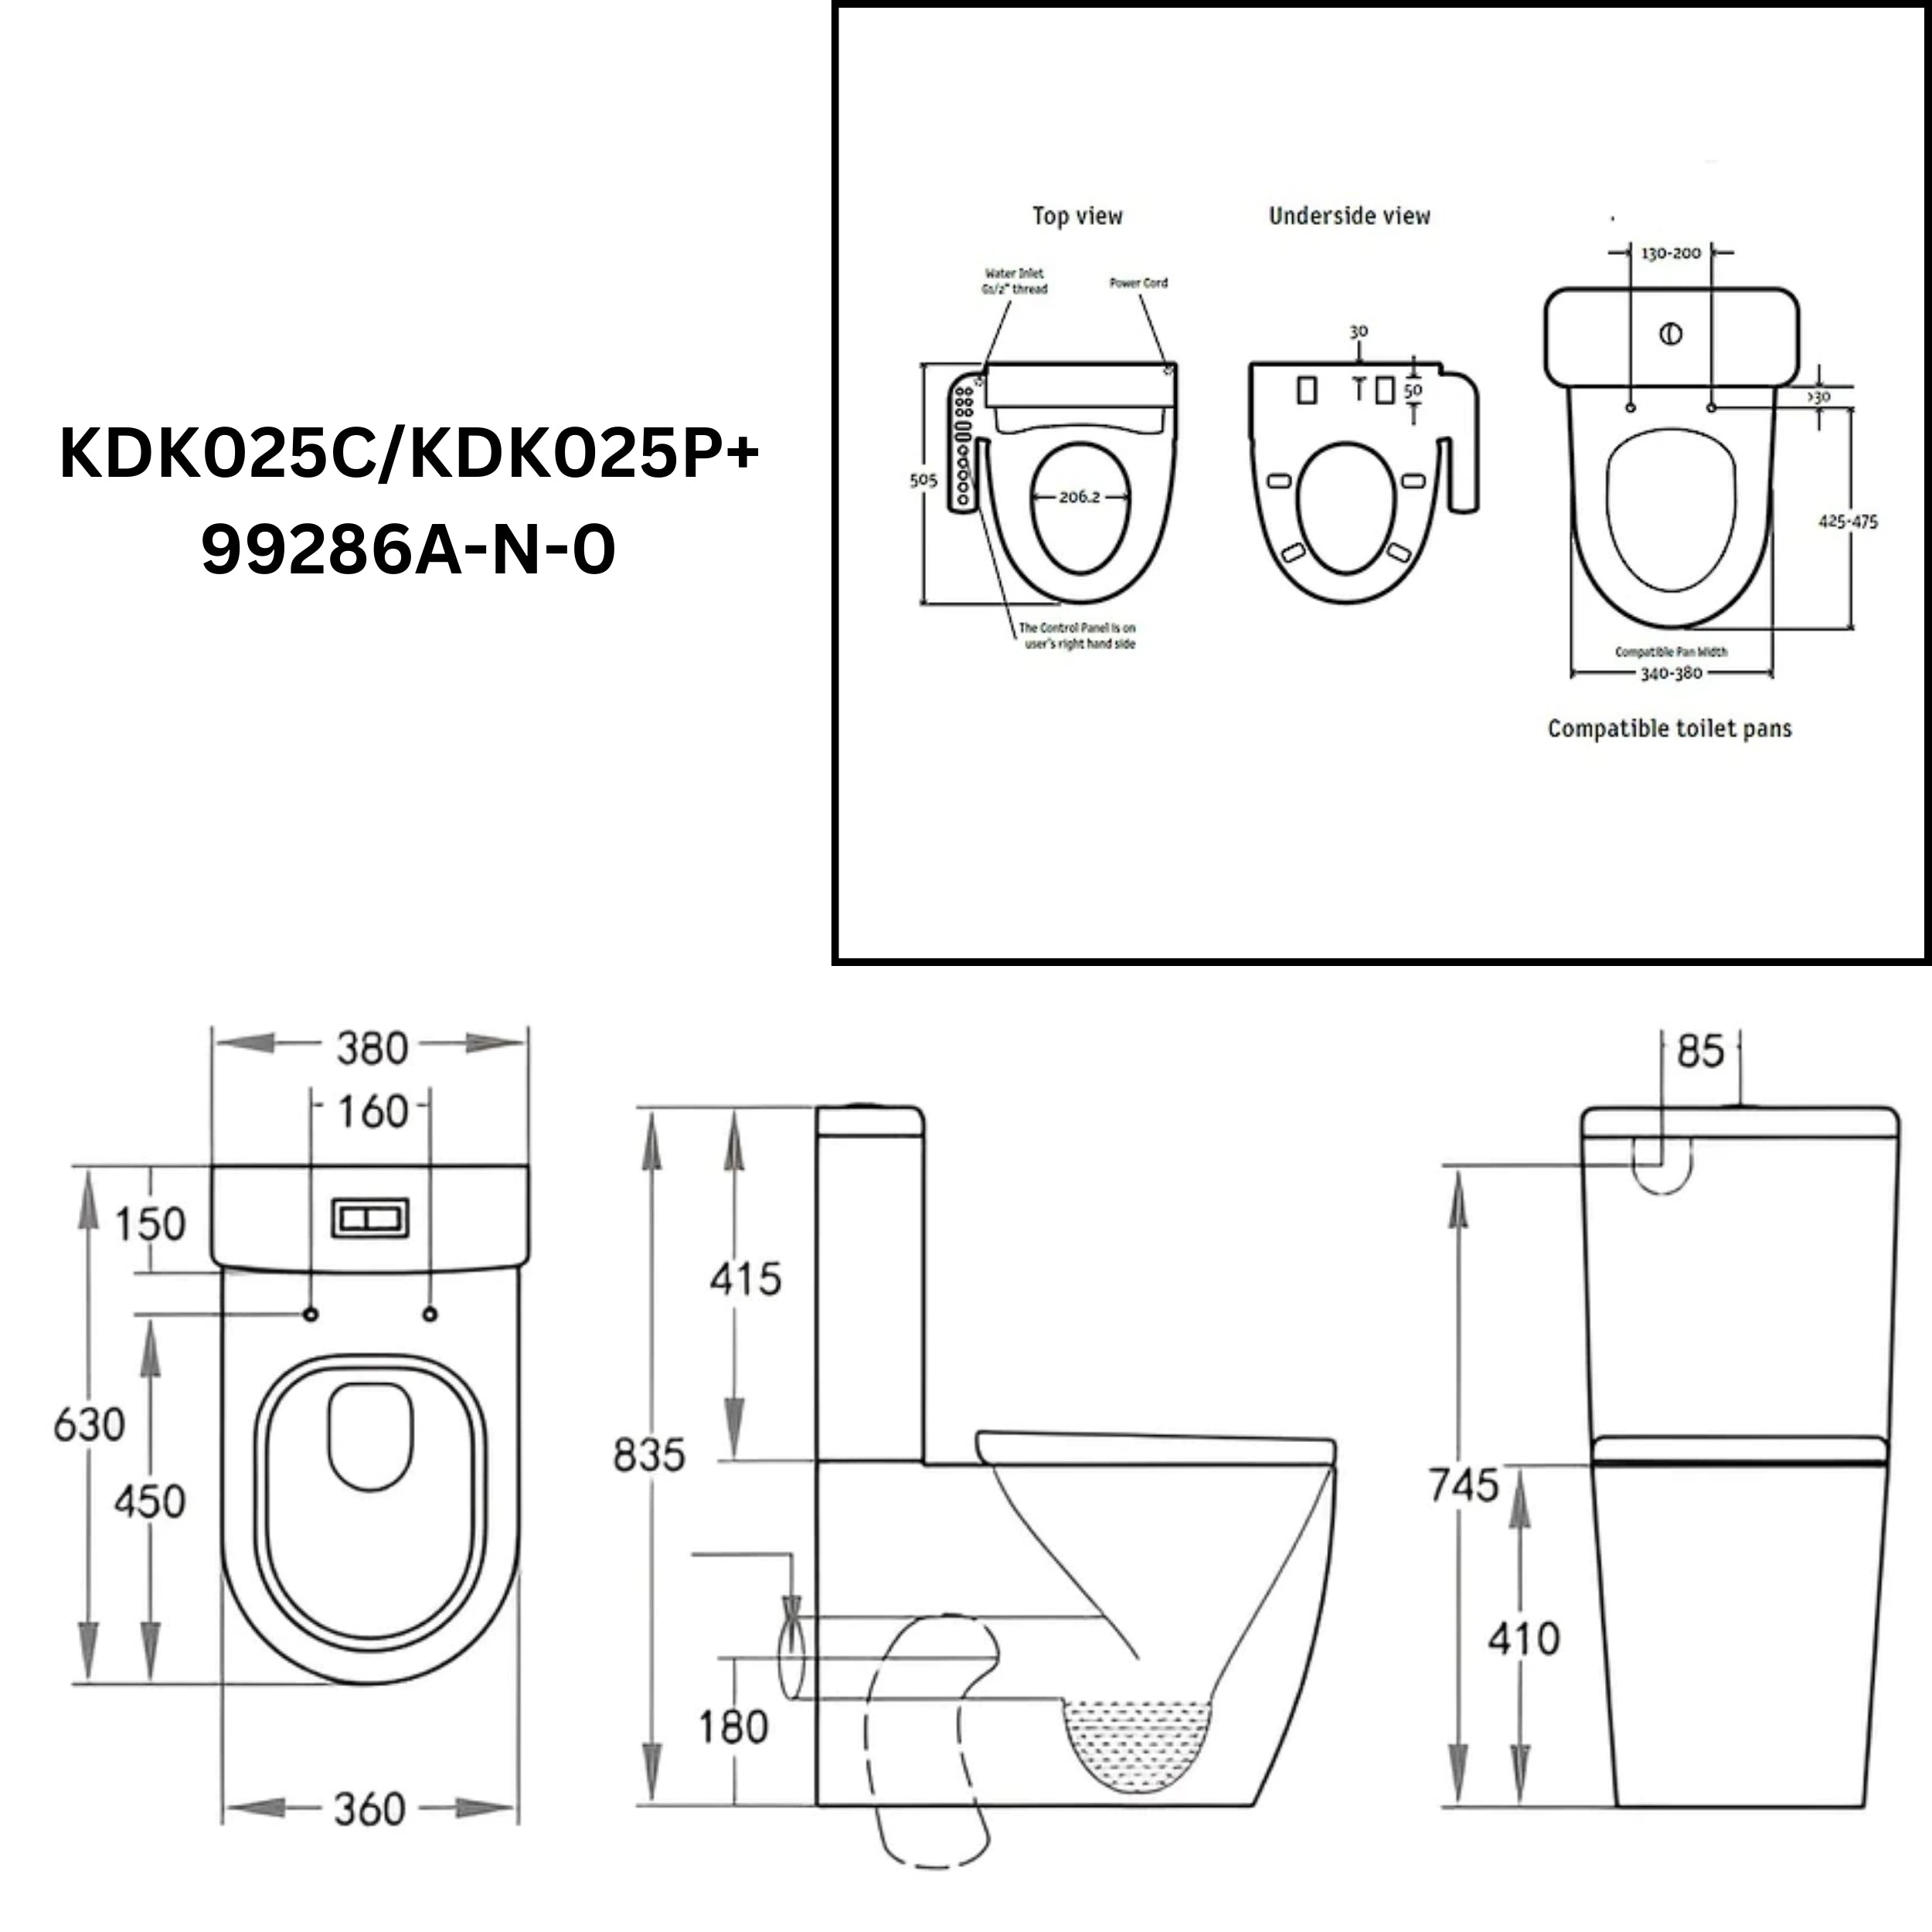 KOHLER ELECTRONIC BIDET SEAT W/ SIDE CONTROL AND VEDA BTW TOILET SUITE PACKAGE ELONGATED GLOSS WHITE